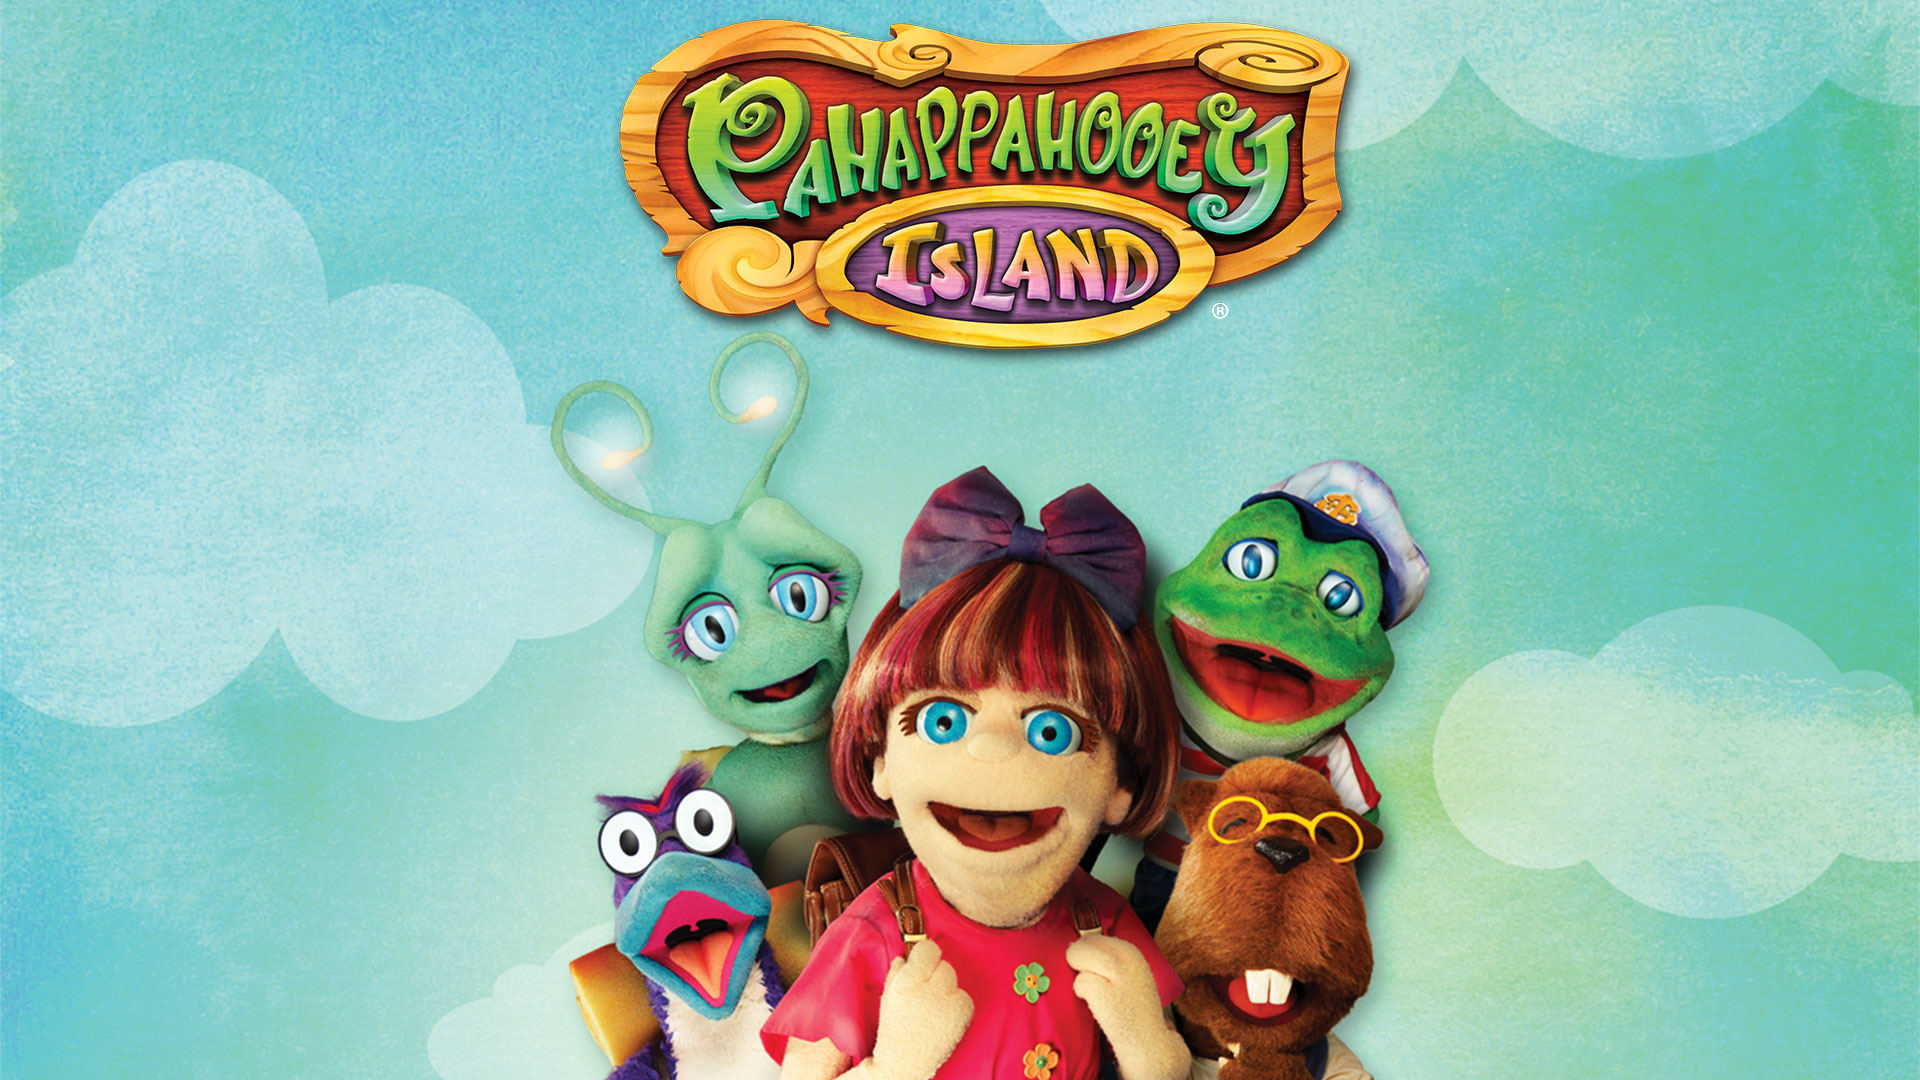 Pahappahooey Island Series. This adventurous gang is always there to learn a valuable and hilarious lesson.